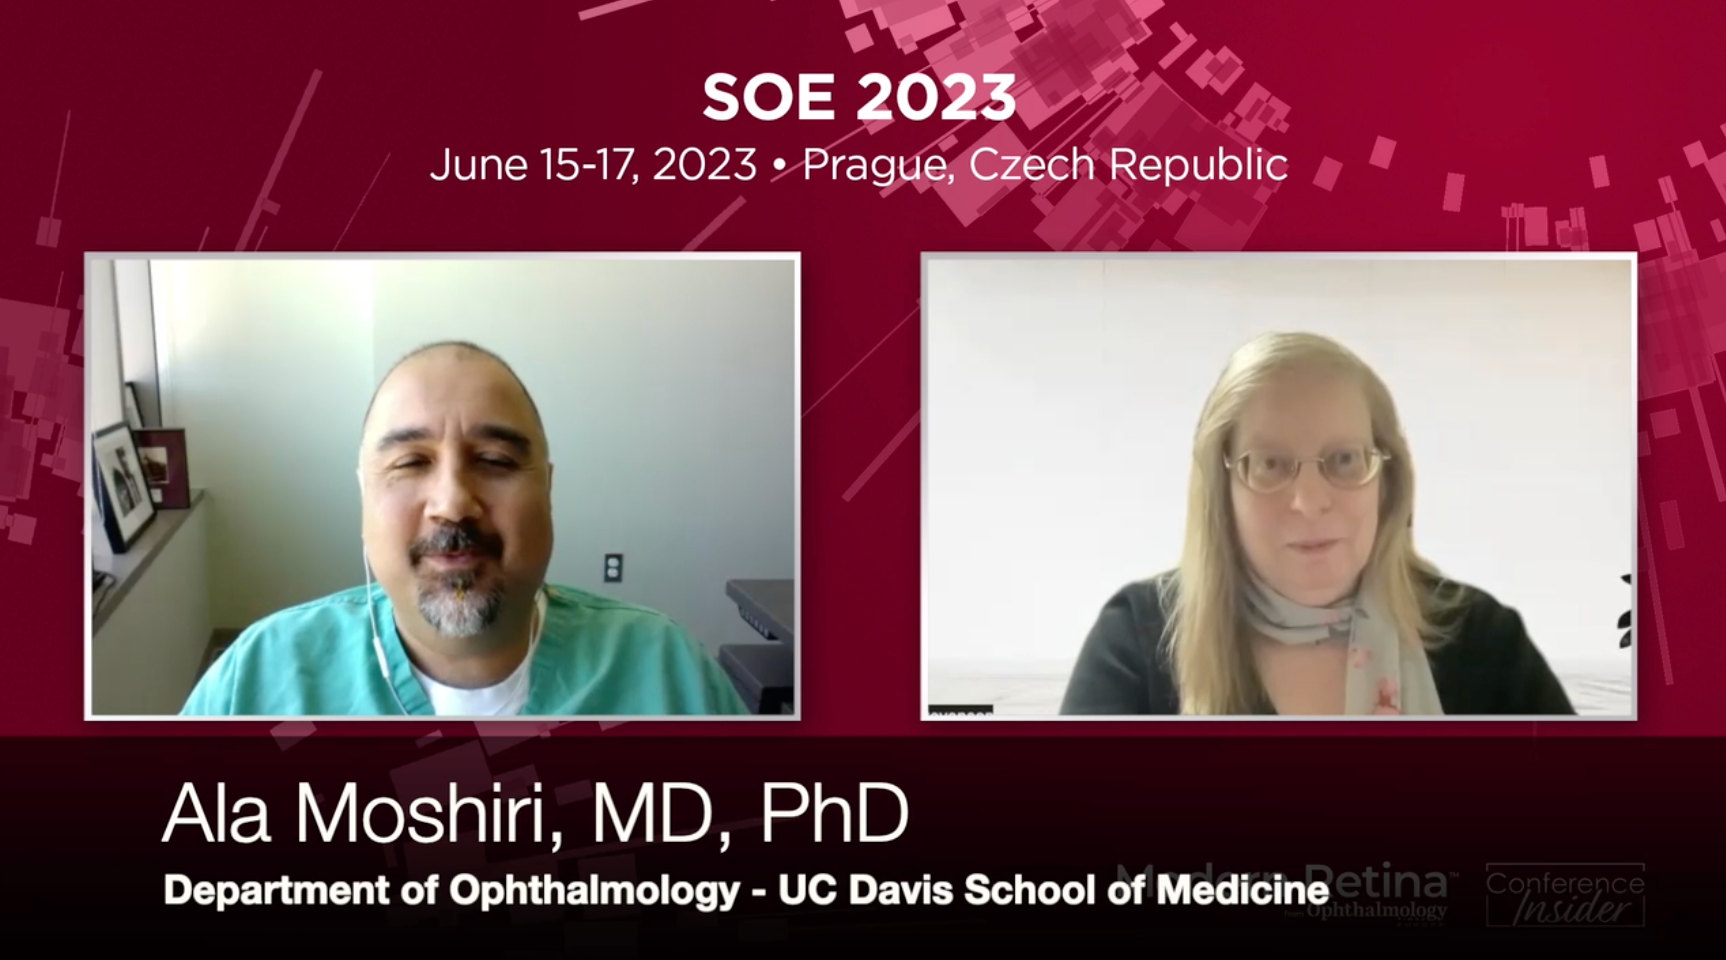 Via video chat, Ala Moshiri, MD, PhD, provides an overview of current treatment options for diabetic macular edema, appearing virtually next to Sheryl Stevenson